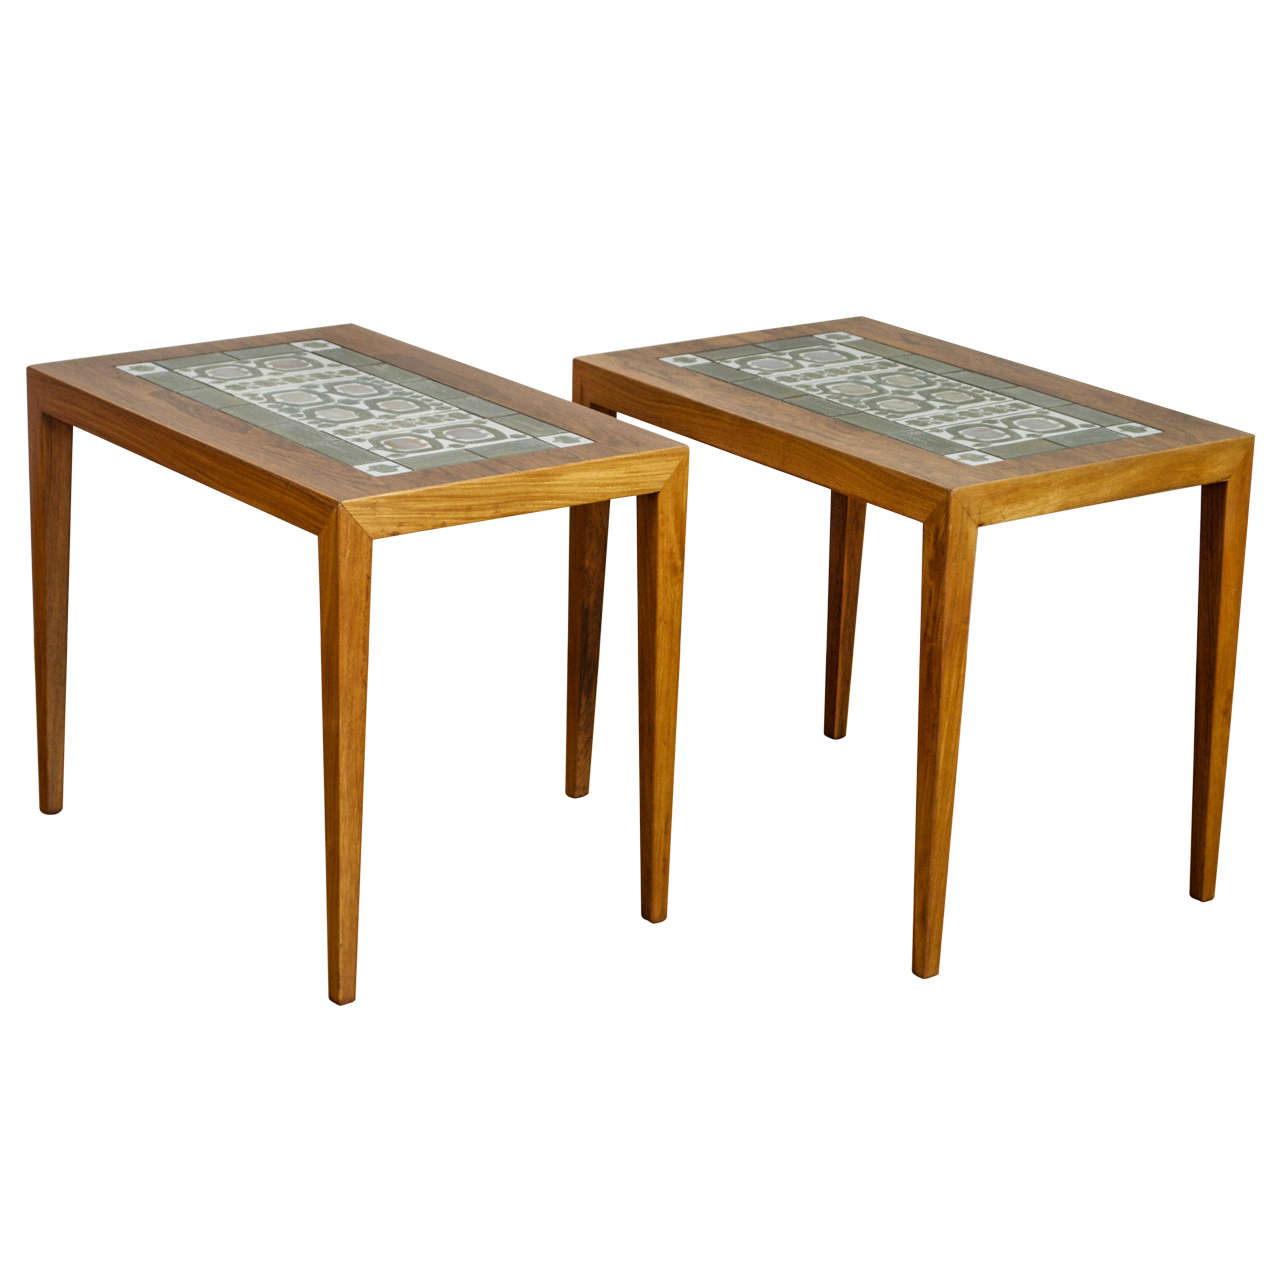 Haslev Furniture - Nils Thorsen Tiles - Pair of Side Tables